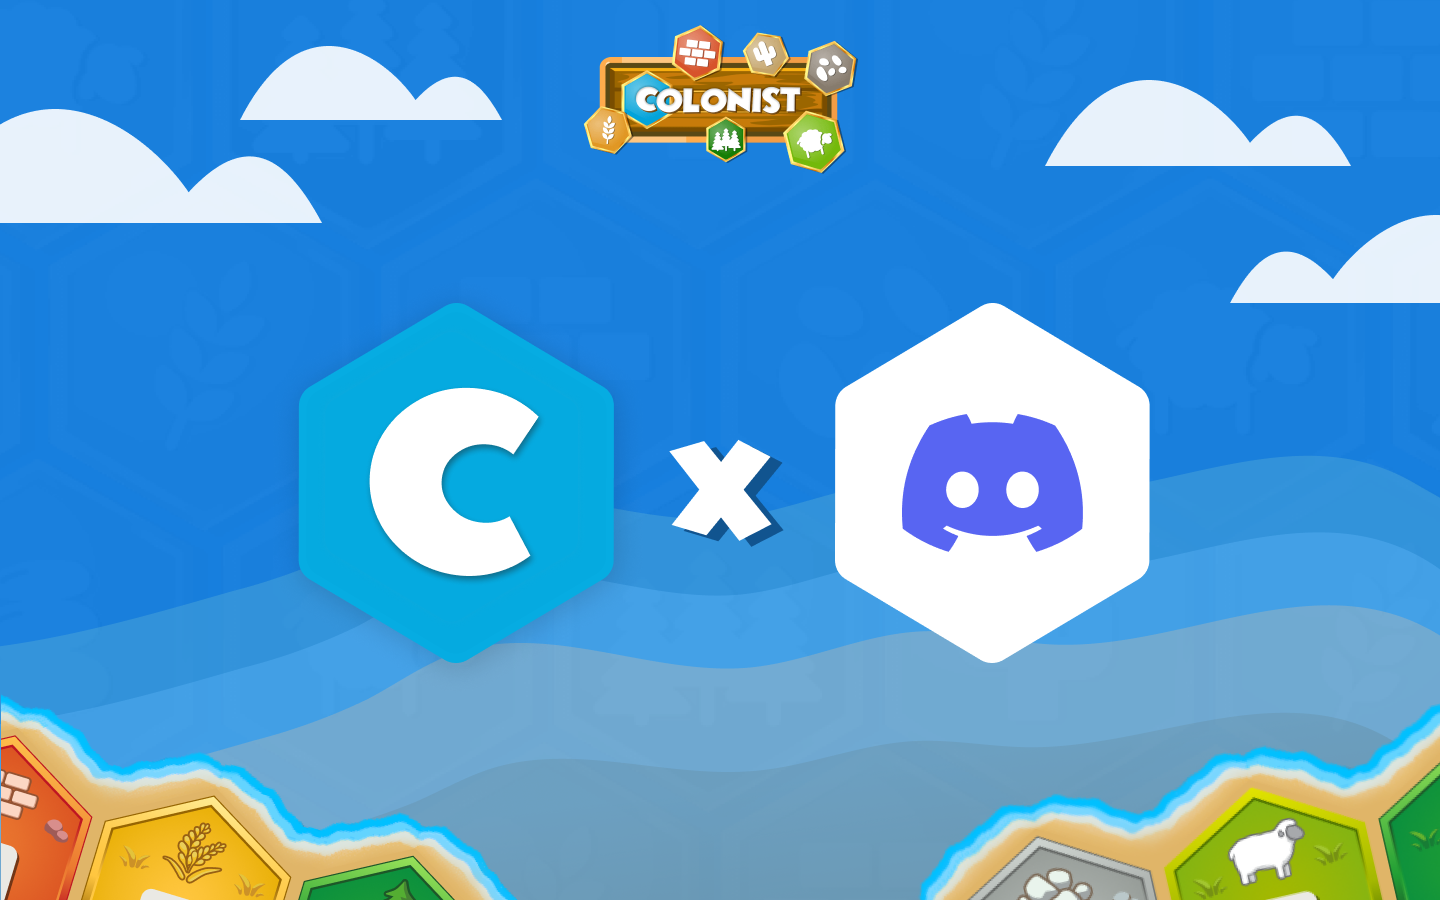 You can now play Colonist on Discord!